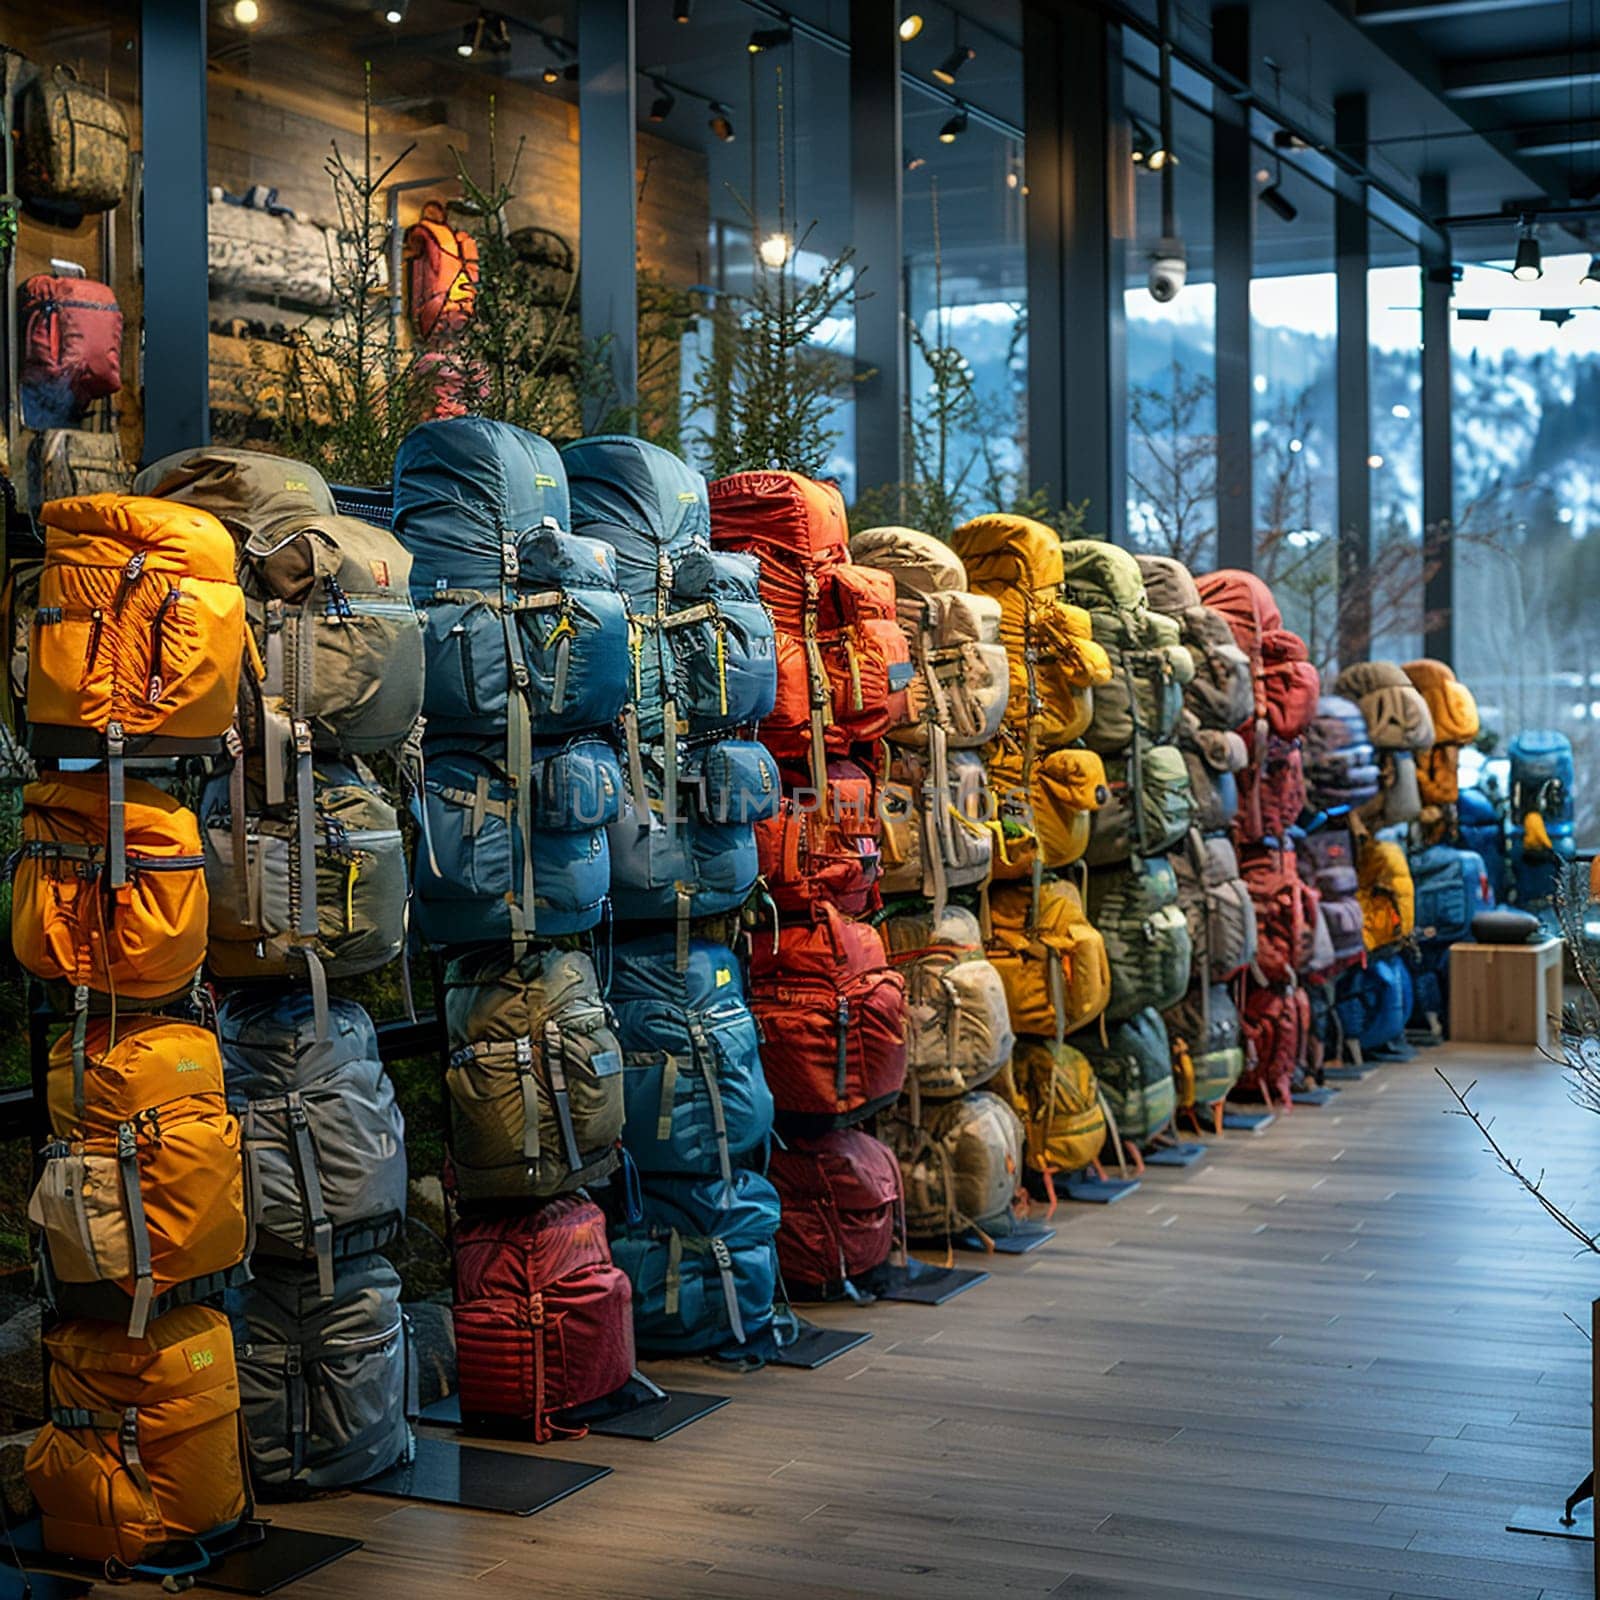 Outdoor Gear Displays Equip Exploration in Business of Adventure Retail, Backpacks and tents outfit a narrative of discovery and endurance in the outdoor business.